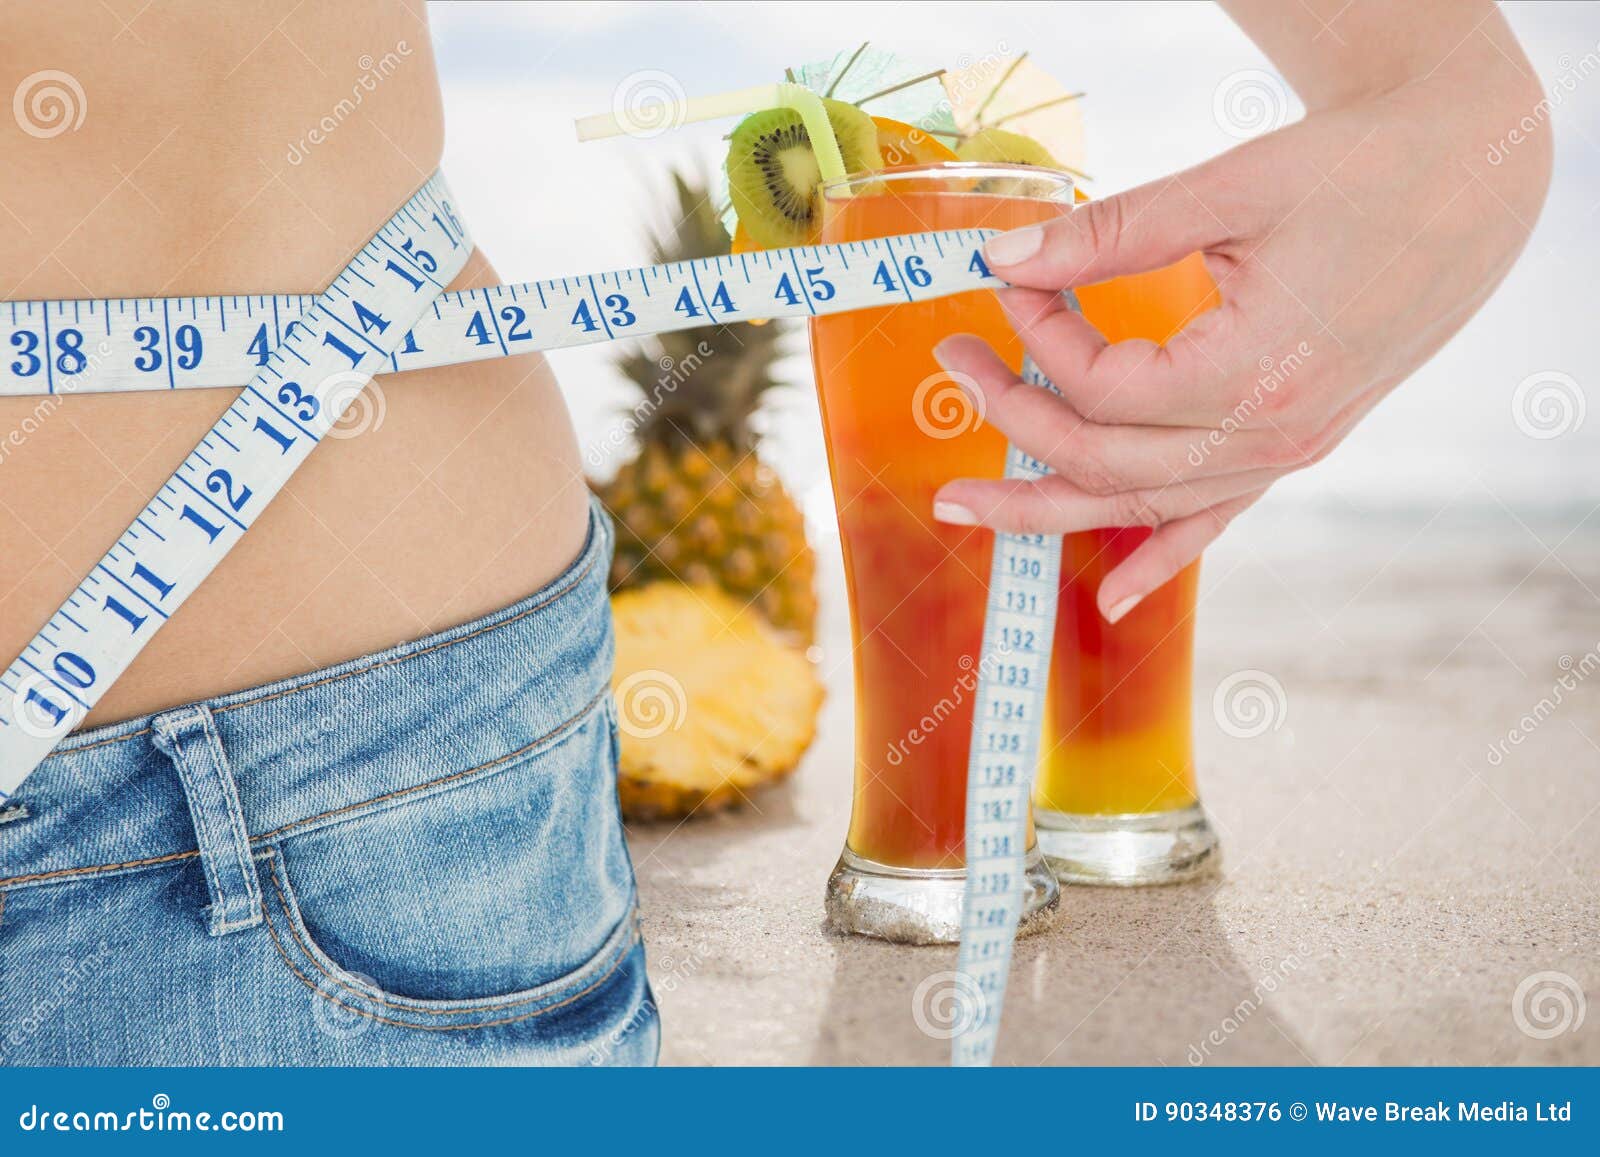 midsection section of woman measuring waist with juices in background